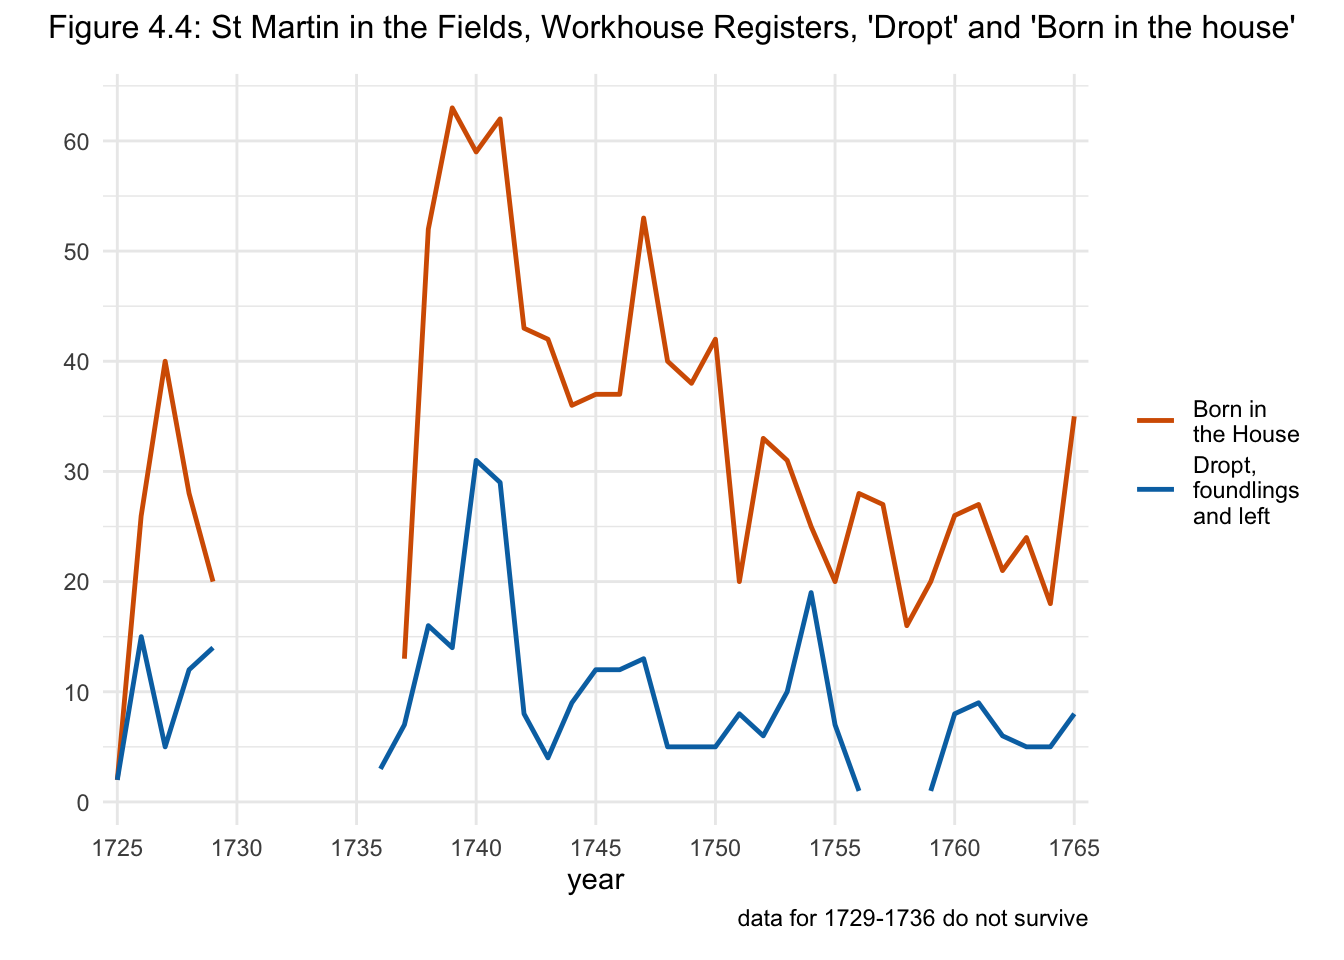 Figure 4.4: St Martin in the Fields, Workhouse Registers, 'Dropt' and 'Born in the house'.